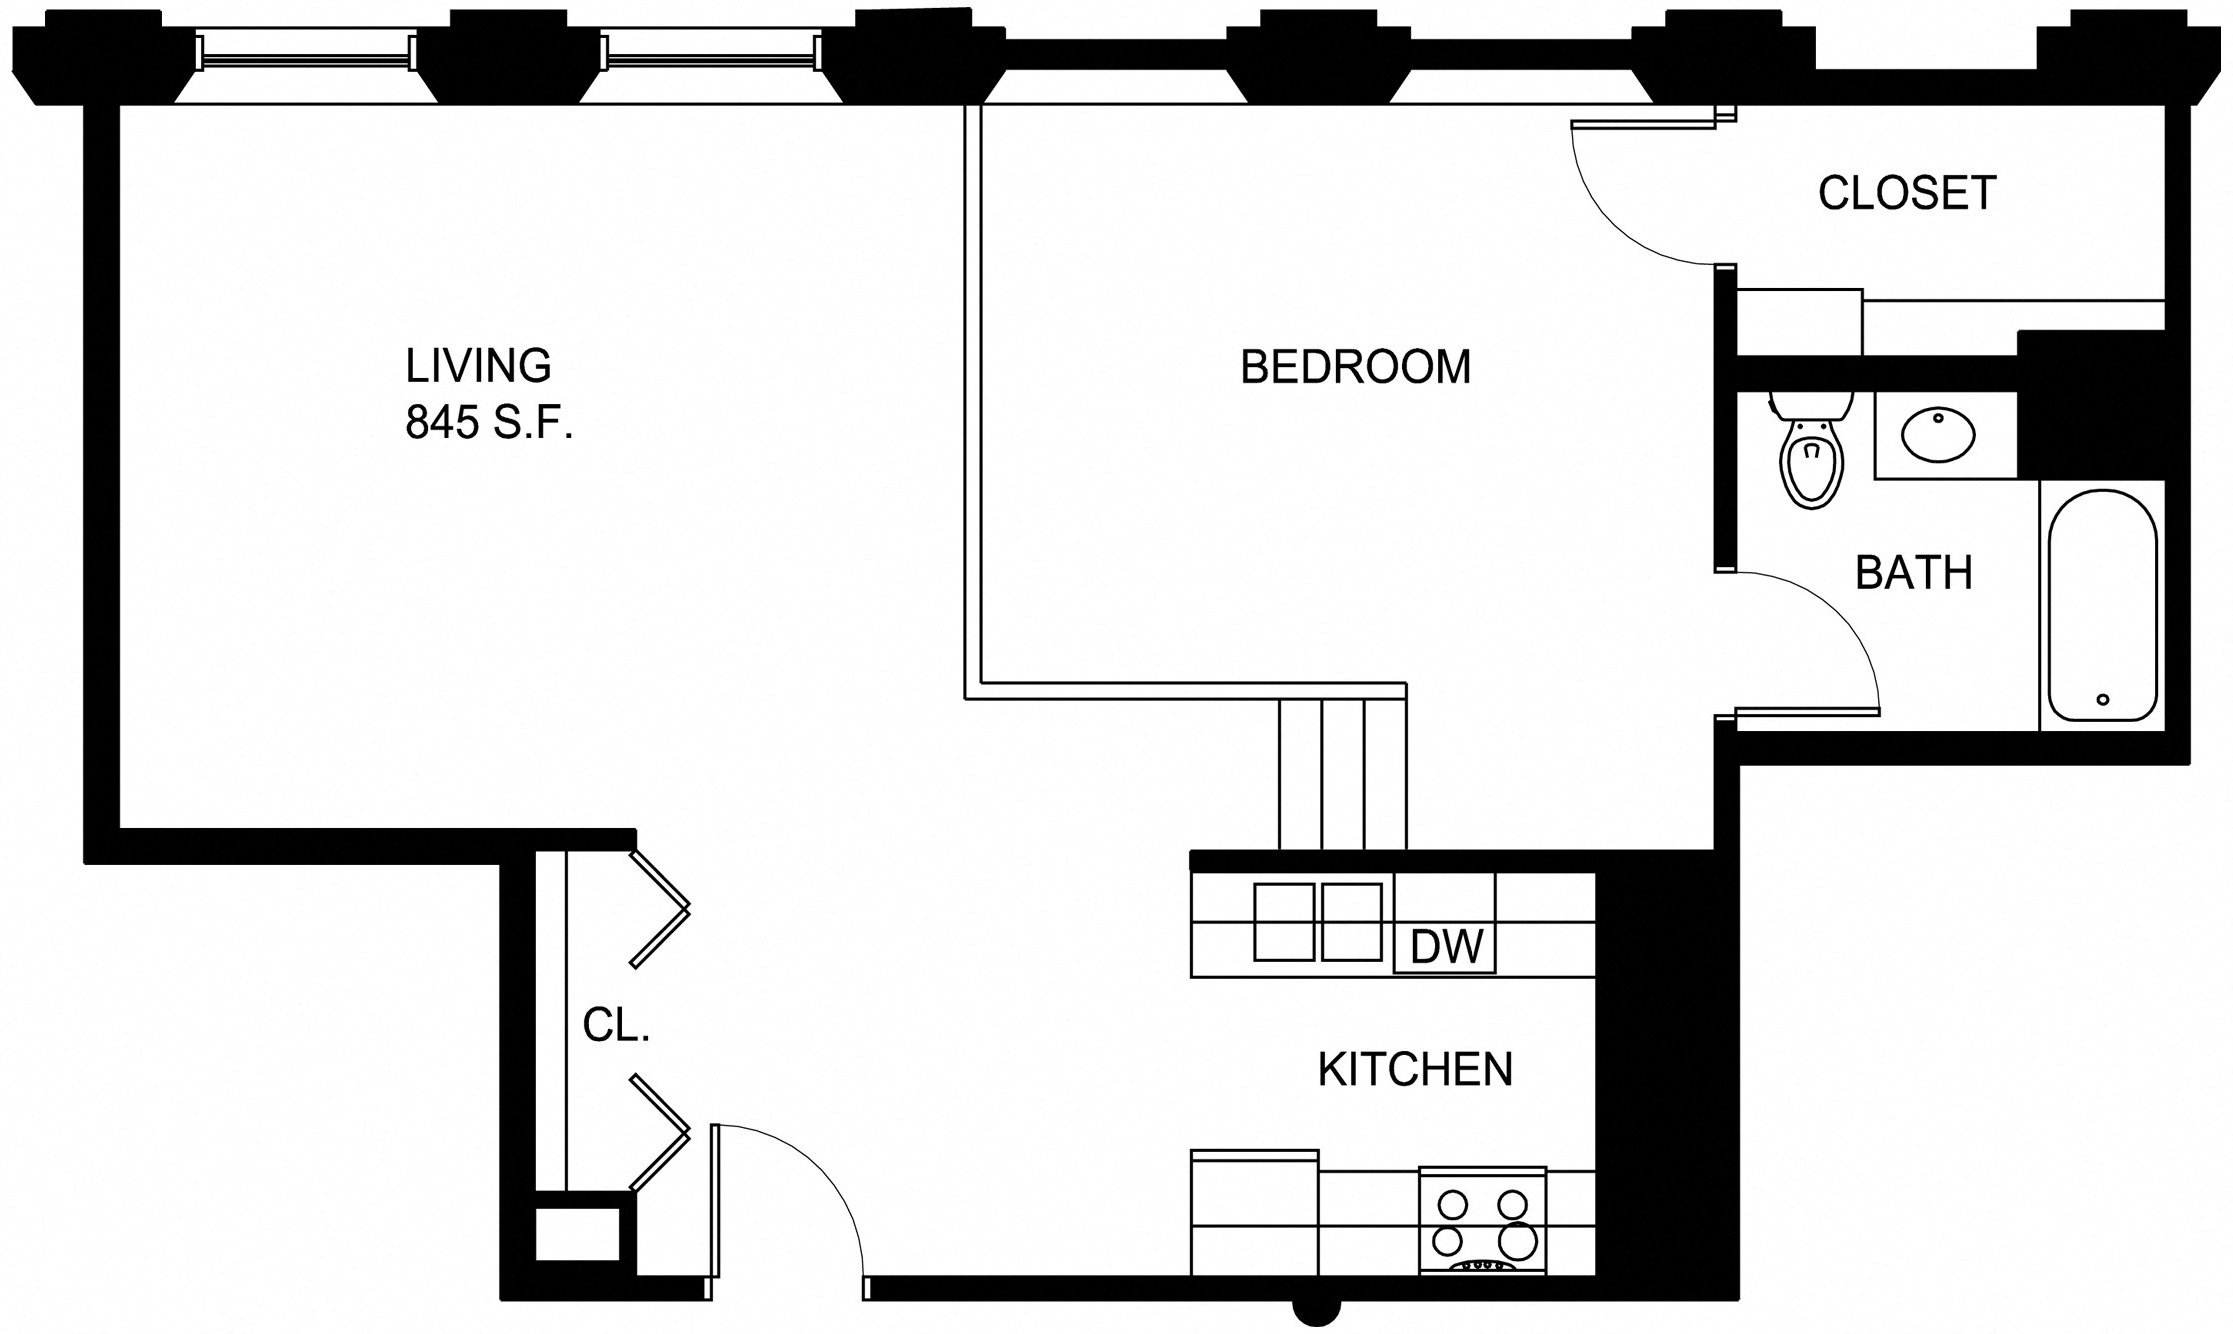 Floorplan for Apartment #P246, 0 bedroom unit at Halstead Providence